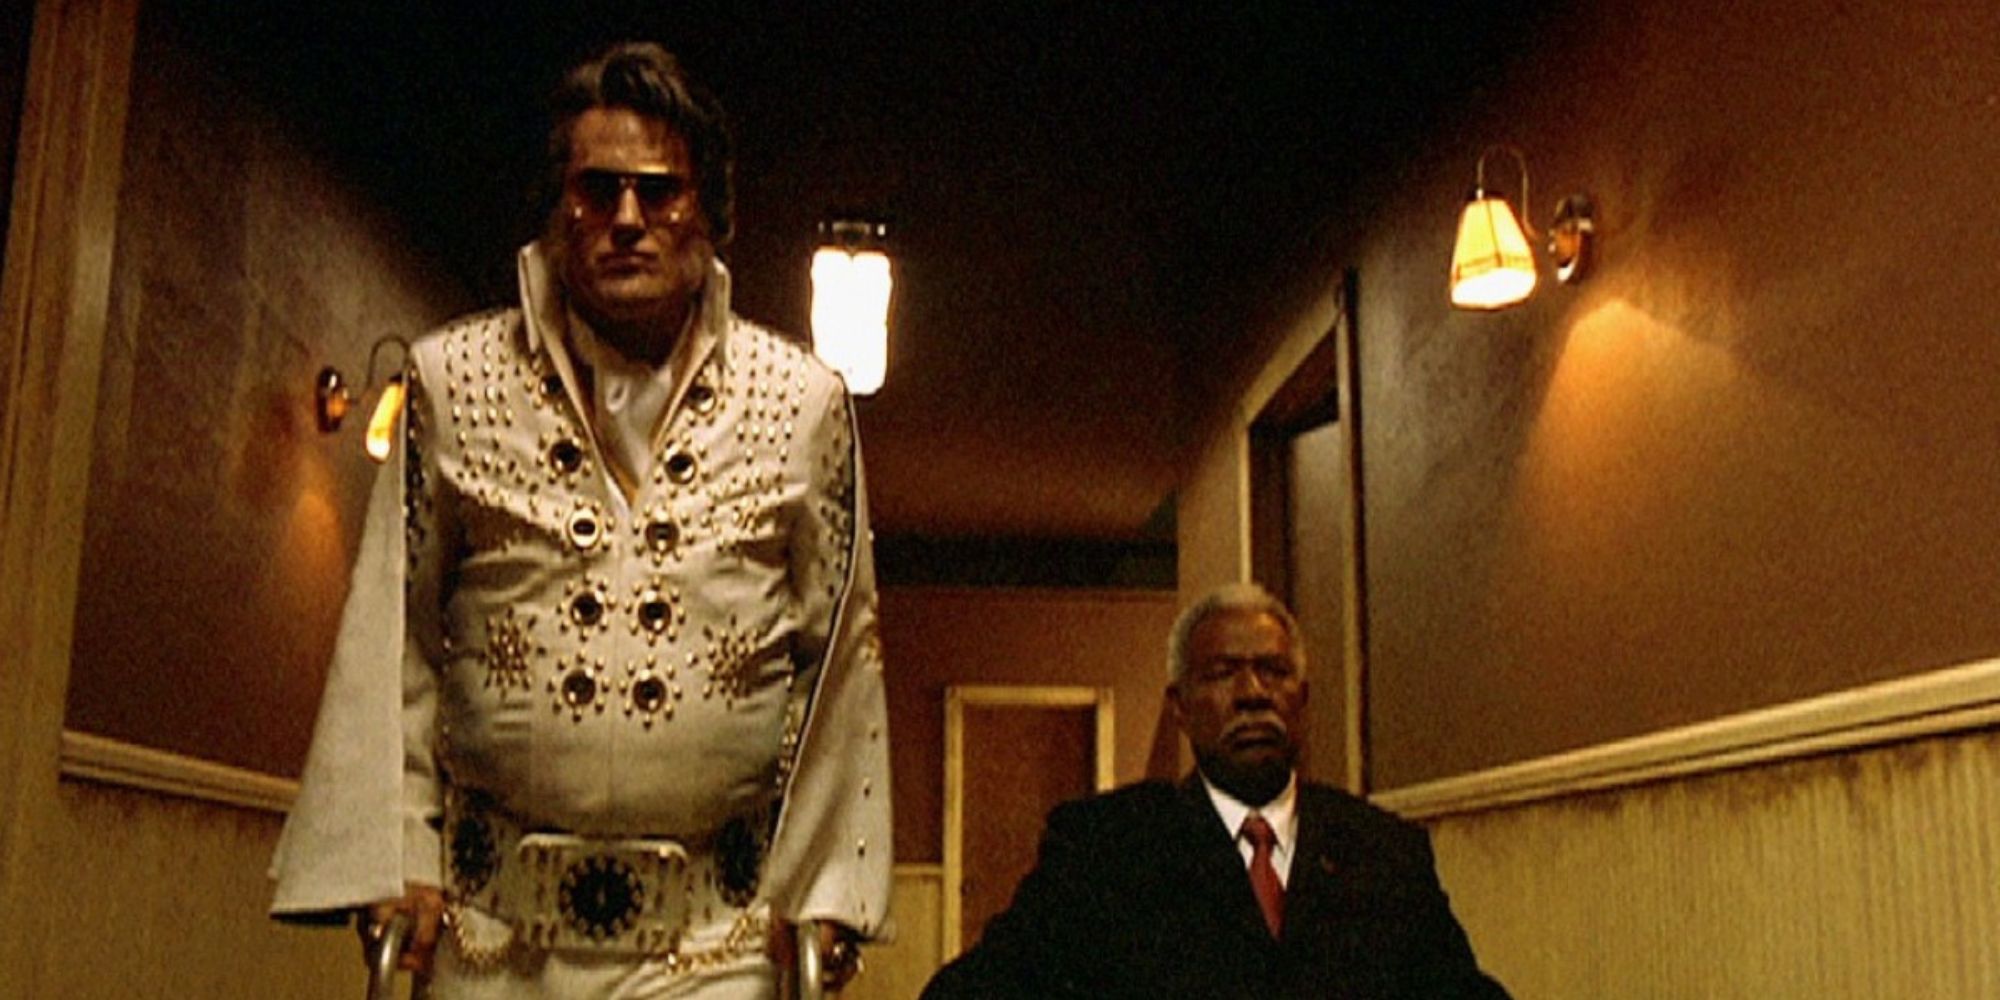 Bruce Campbell as Elvis and Ossie Davis as John F. Kennedy in Bubba Ho-tep (2002)